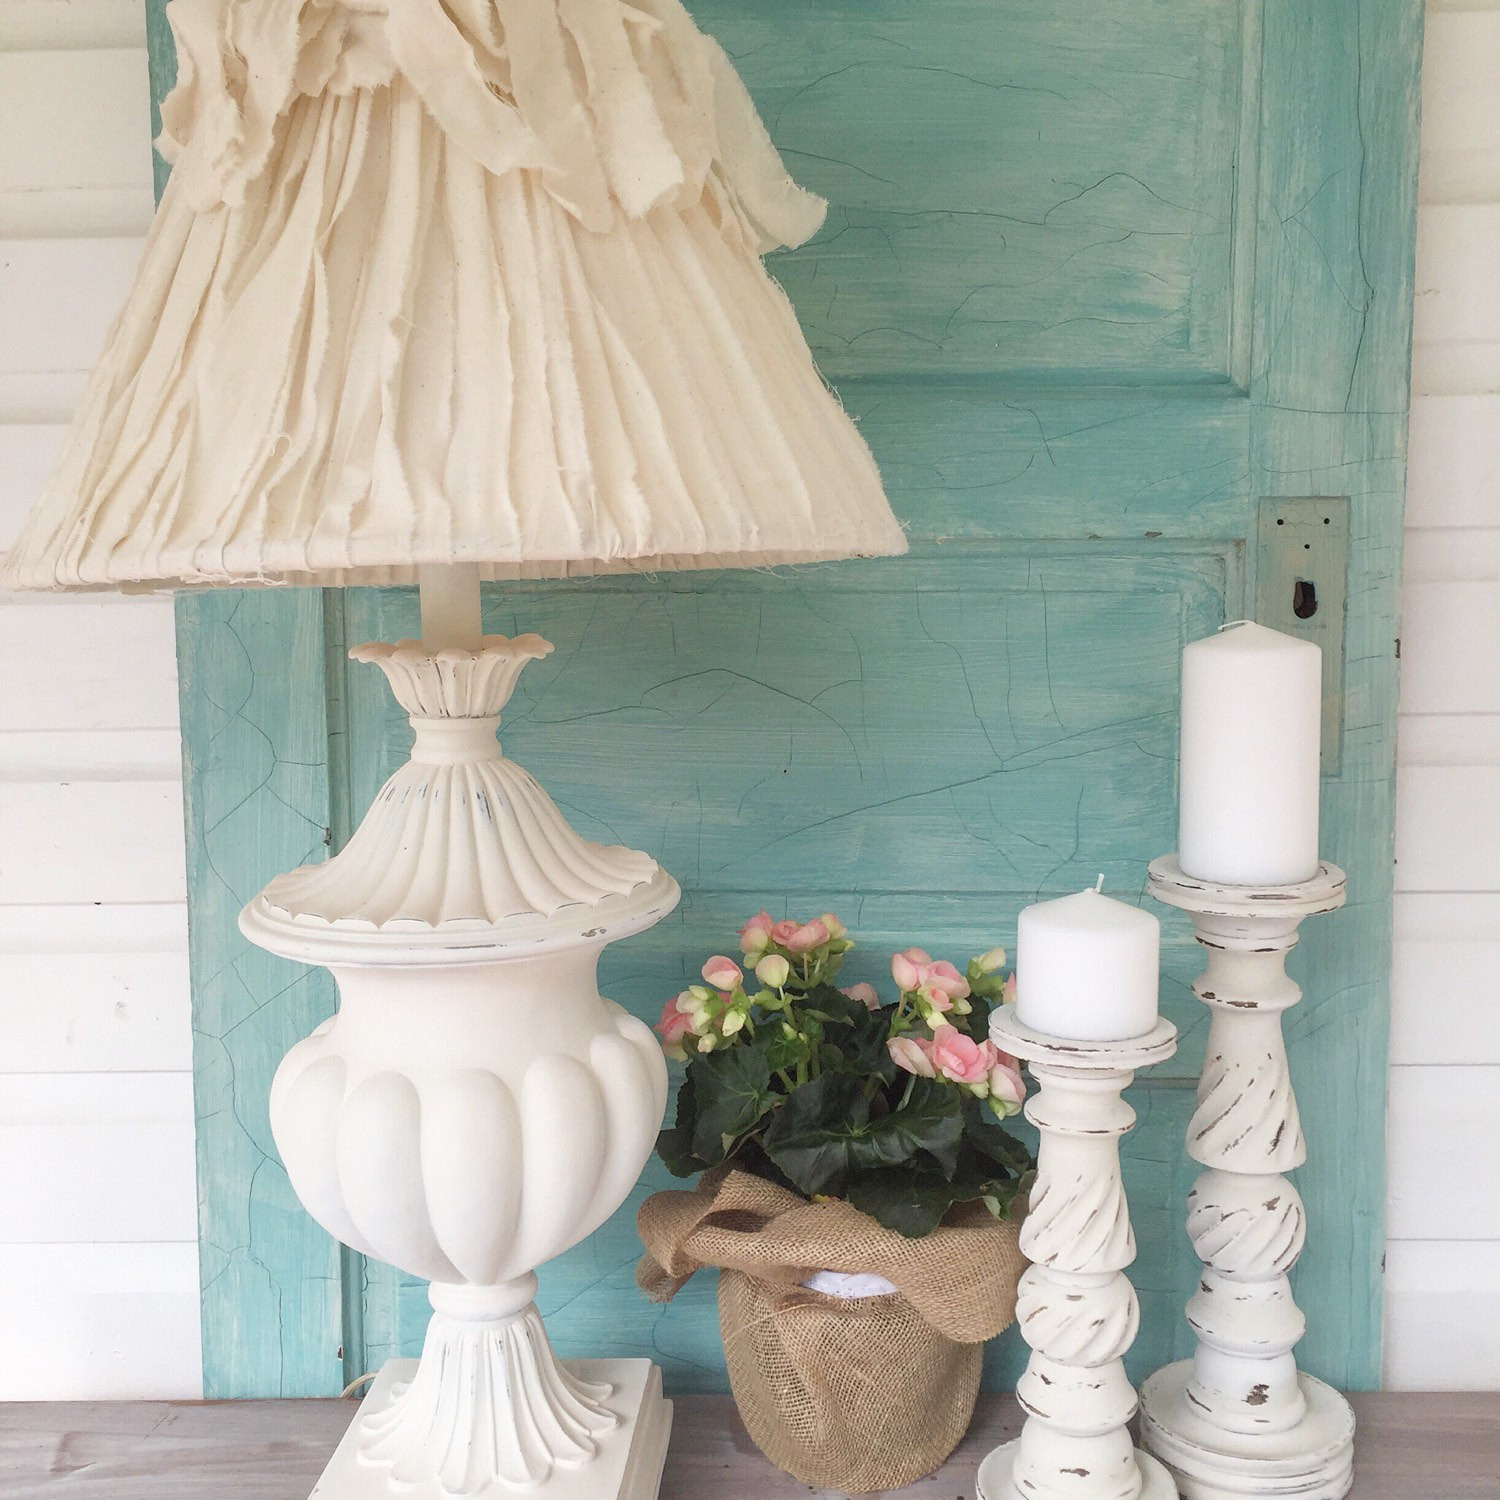 Shabby Chic Bedroom Lamp
 White Shabby Chic Table Lamp Bedroom Light with Cream Tattered